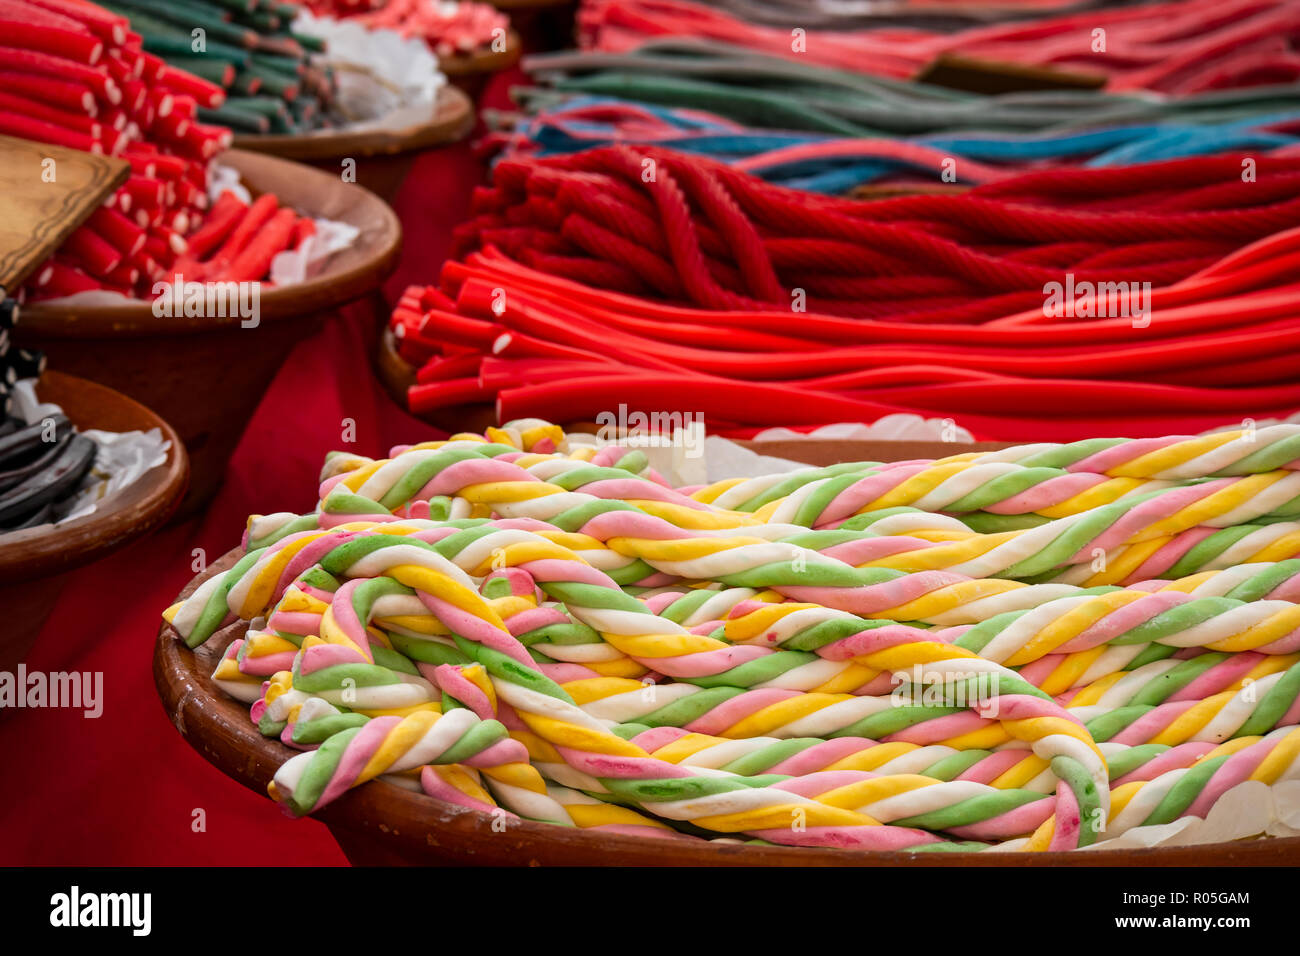 colorful variety of sweets Stock Photo